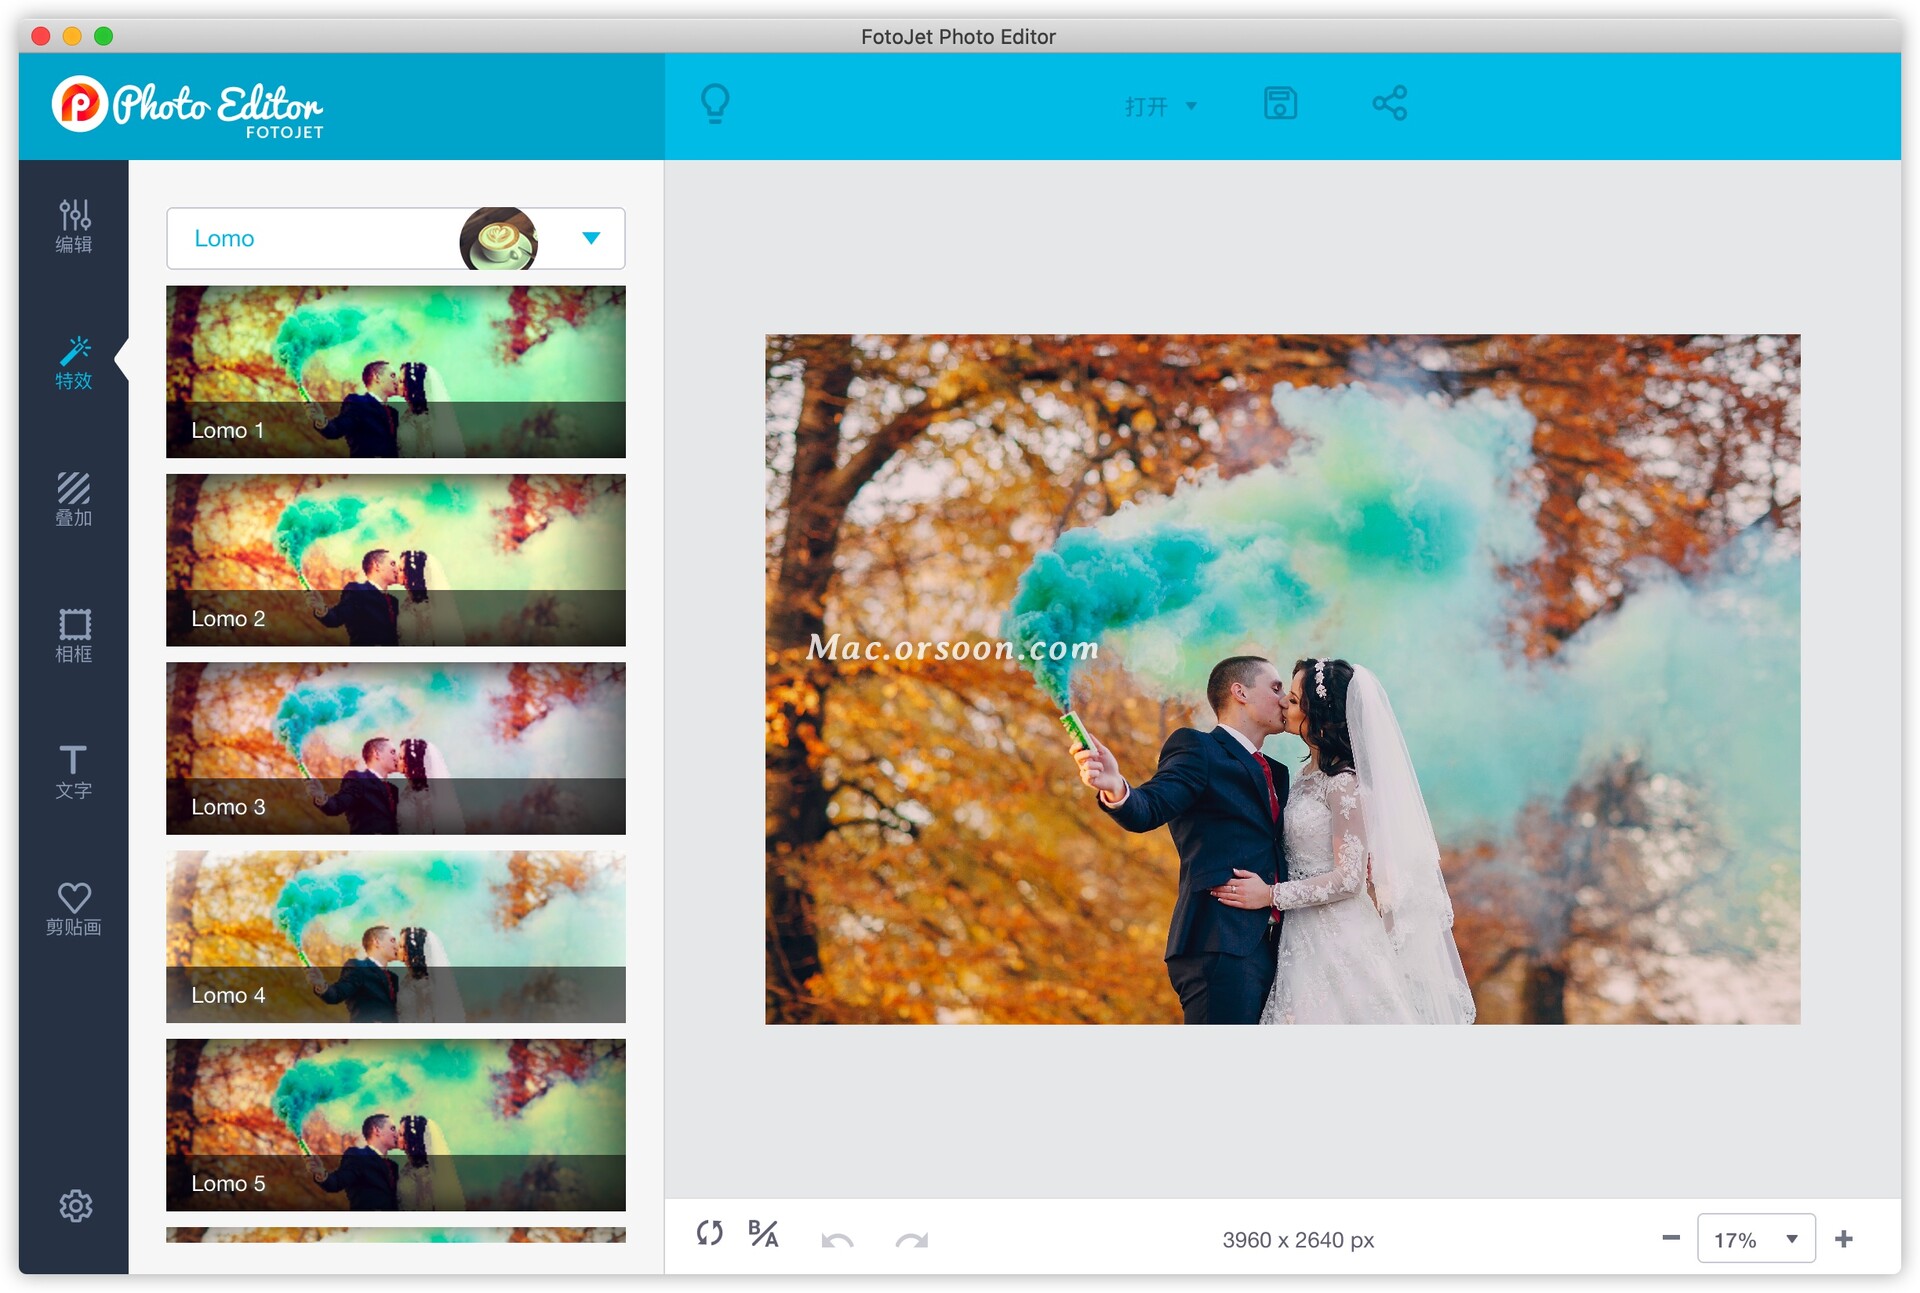 FotoJet Photo Editor 1.1.7 for windows download